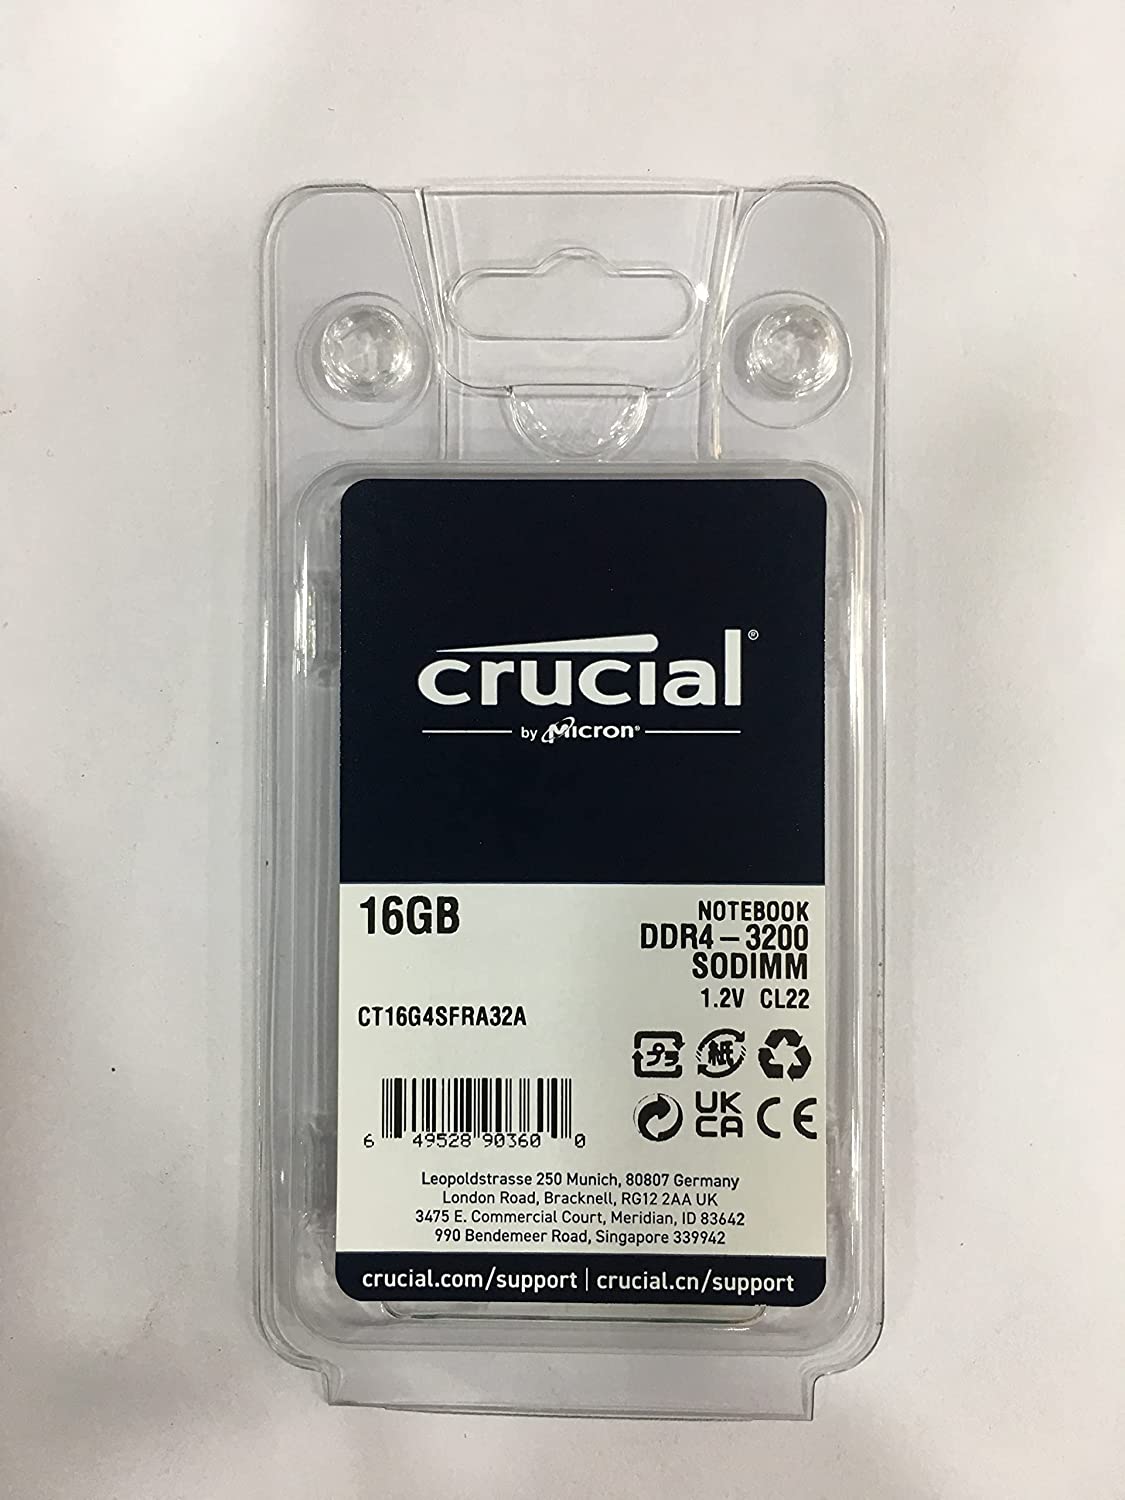 Does anyone use 16GB Crucial CT16G4SFRA32A in your DS 920+? Or how